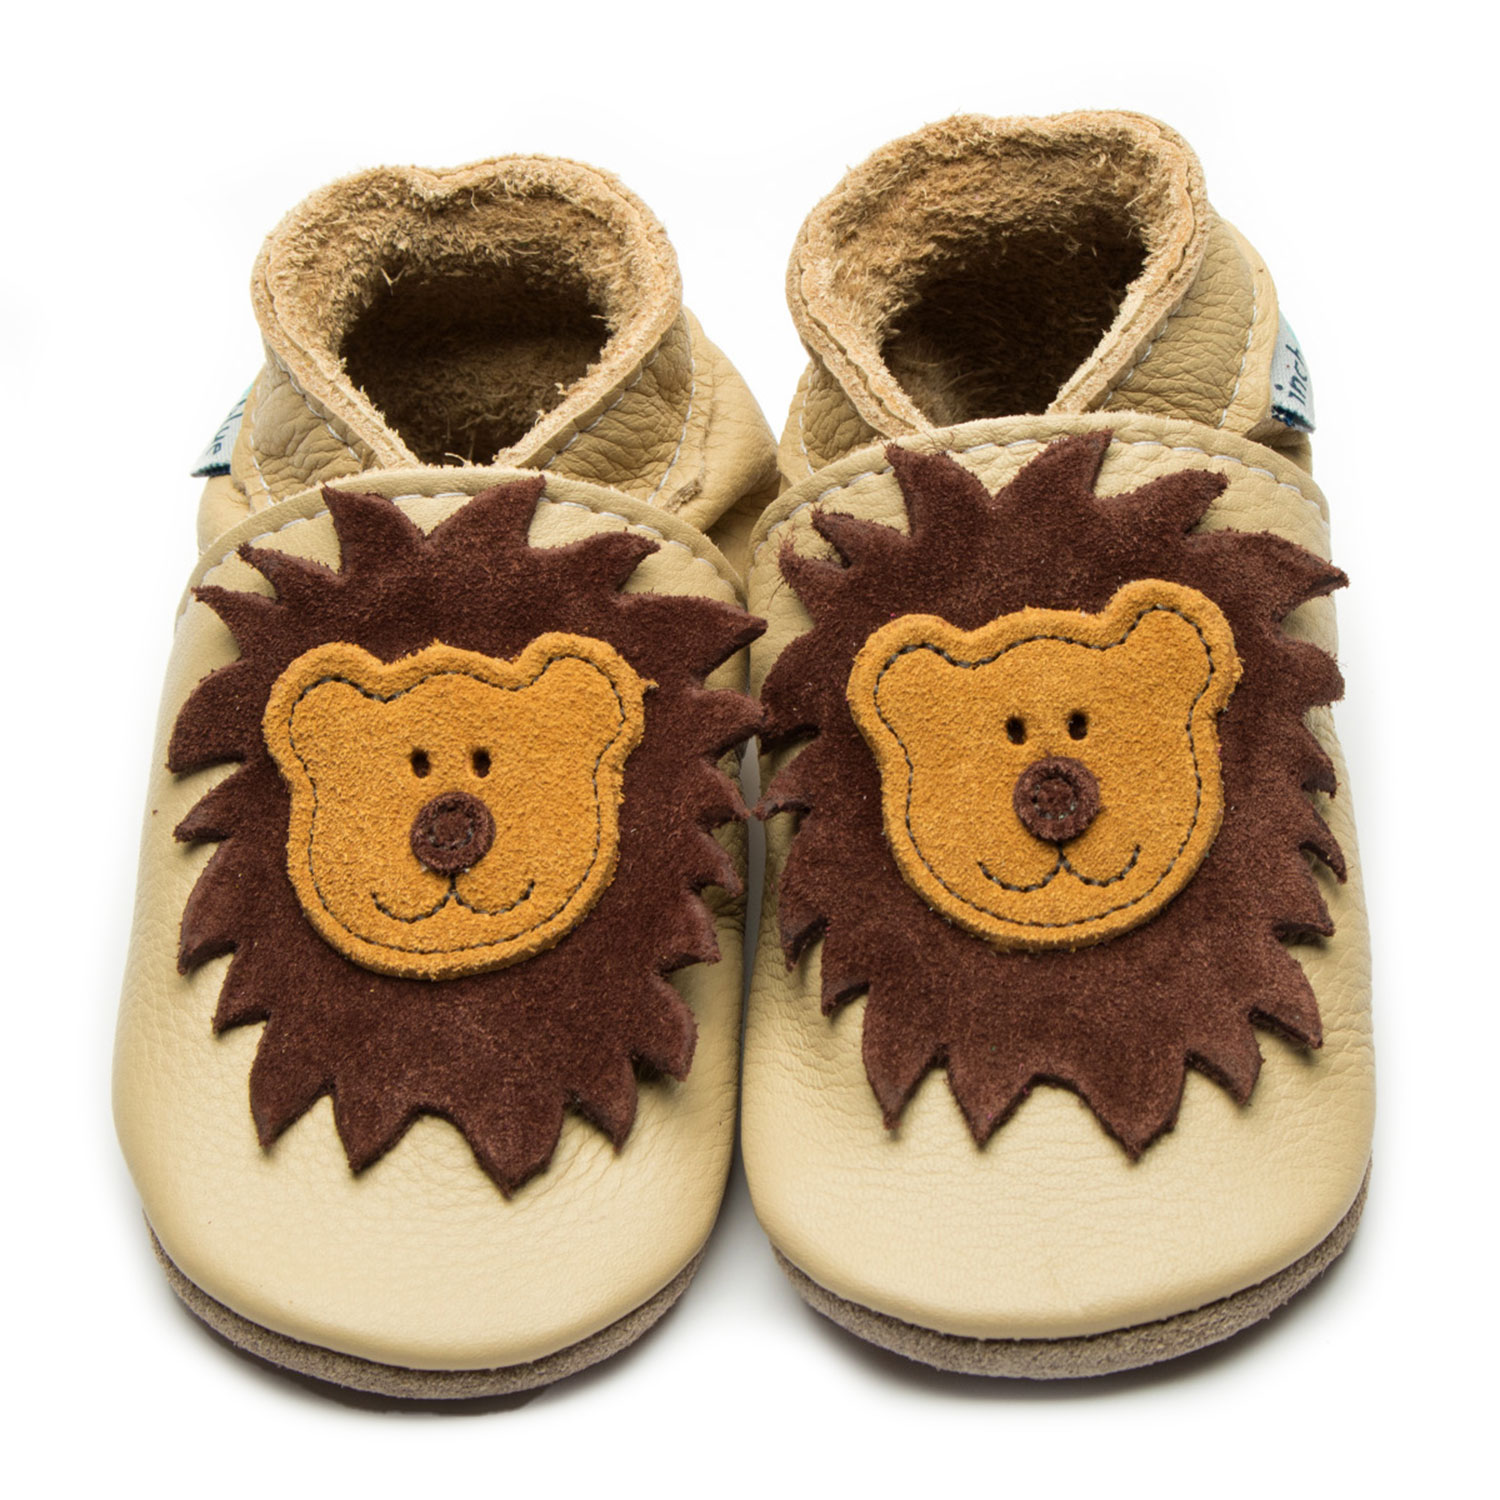 Leather Leo Cream Baby & Toddler Shoes | Boy | Lion Face | Handmade ...